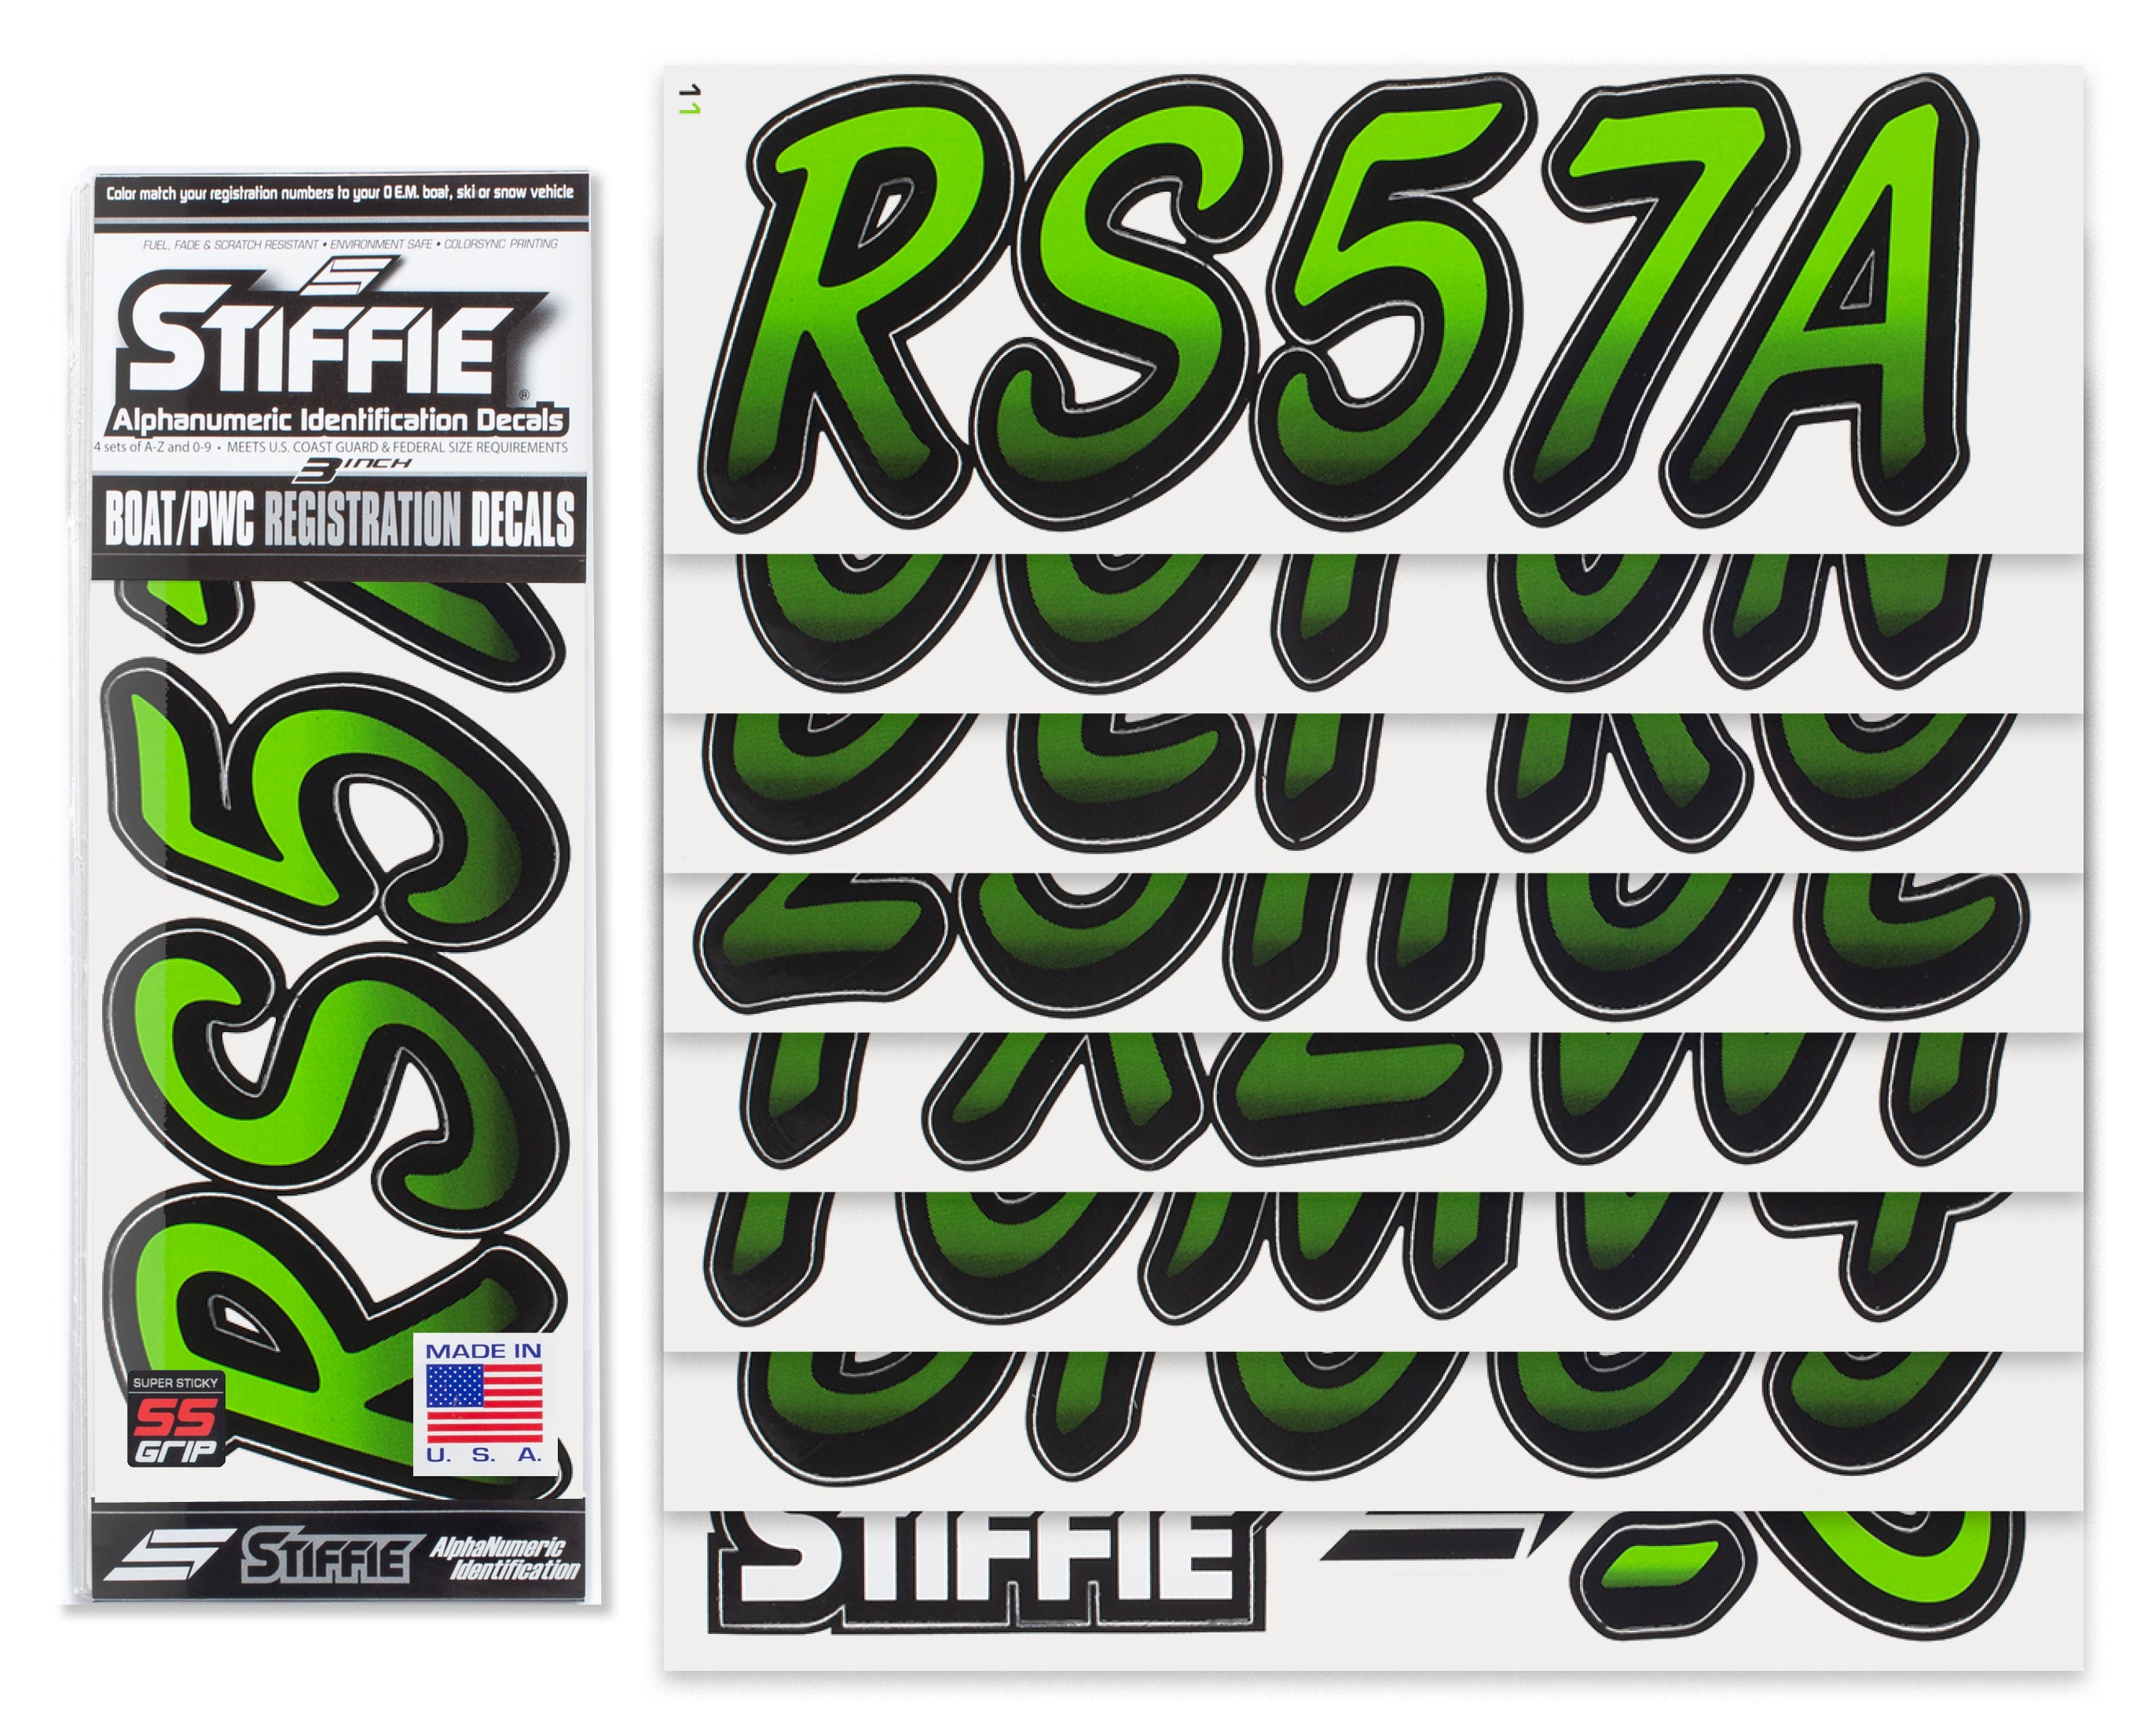 Stiffie Whipline Team Green/Black Super Sticky 3" Alpha Numeric Registration Identification Numbers Stickers Decals for Sea-Doo Spark, Inflatable Boats, Ribs, Hypalon/PVC, PWC and Boats.